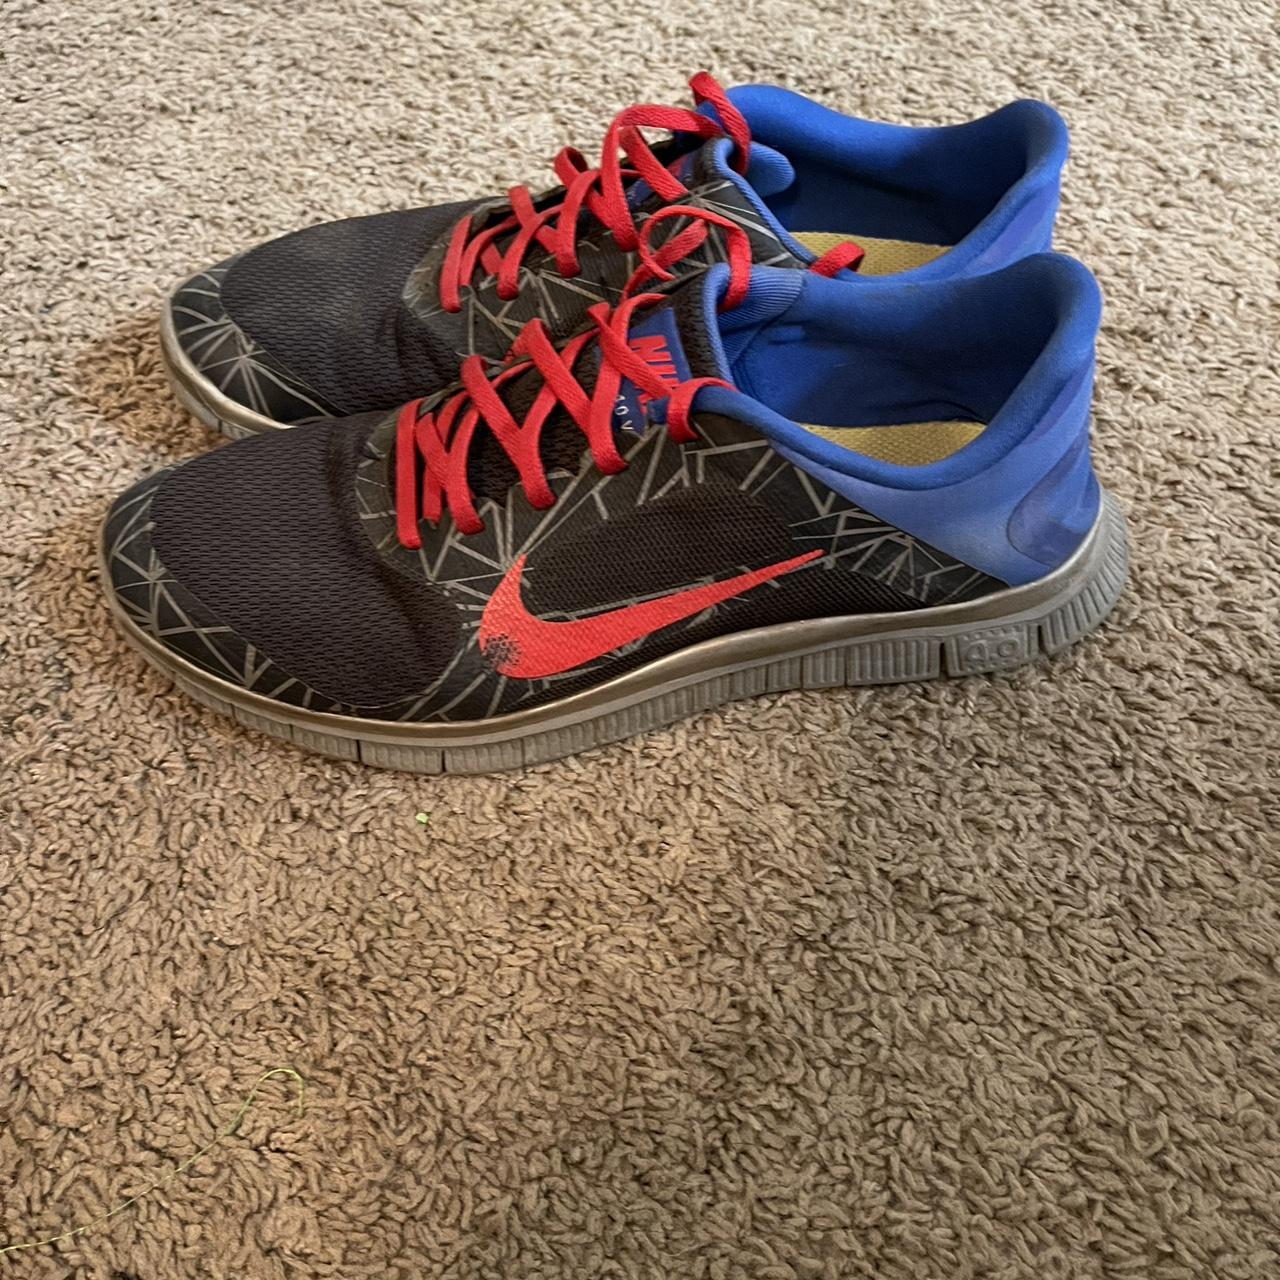 Have used these Nikes back in 2015 ( Nike Free 4.0 v3). Personally